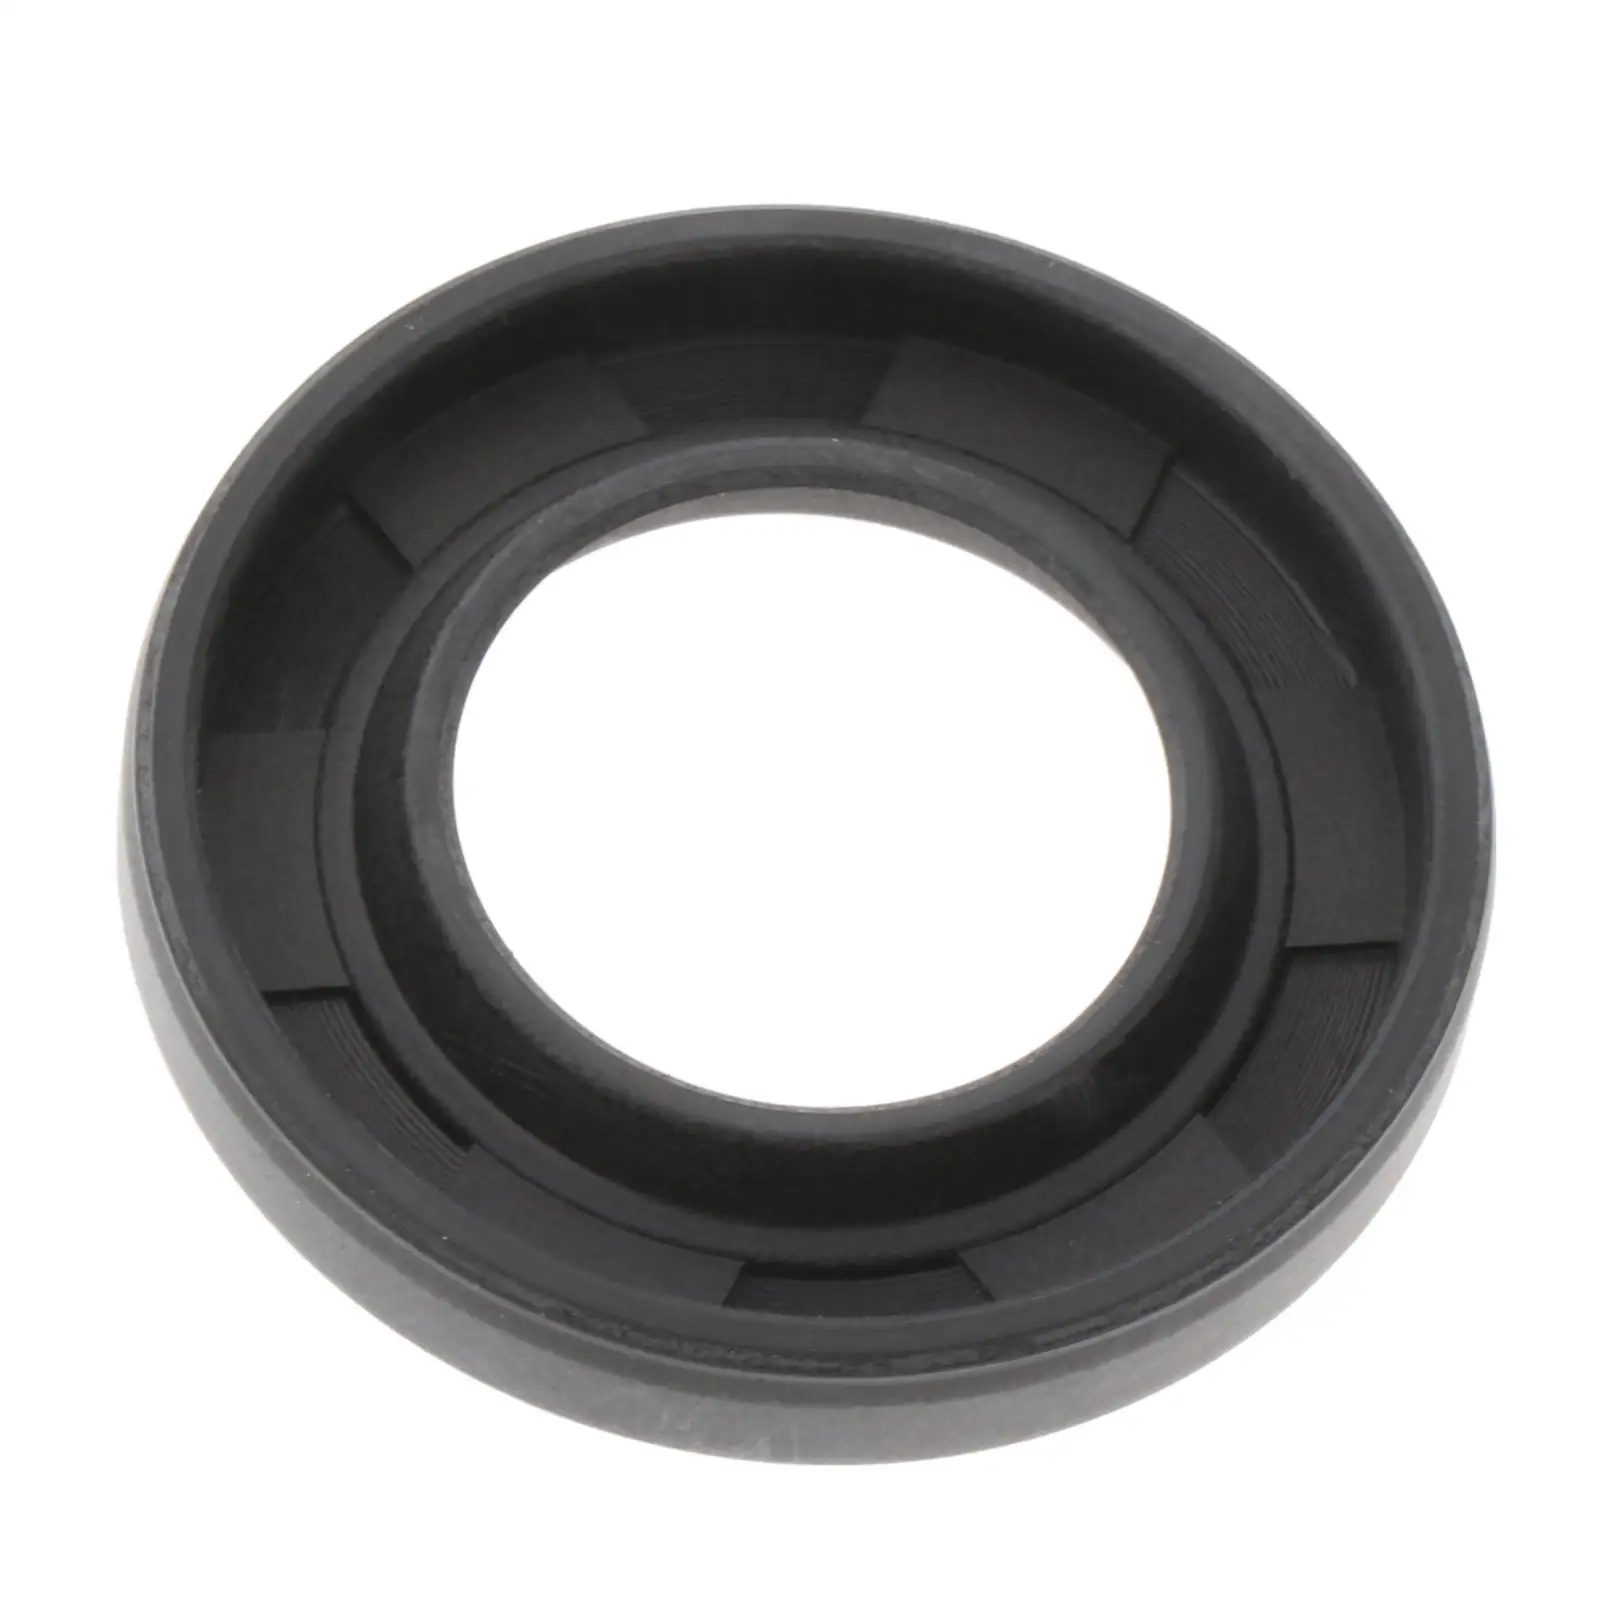 Boat Motor Oil Seal Spare Parts 93106-18M01 Fit for Yamaha Outboard Motor 60HP 70HP 2 Stroke 3cyl Outboard Engine